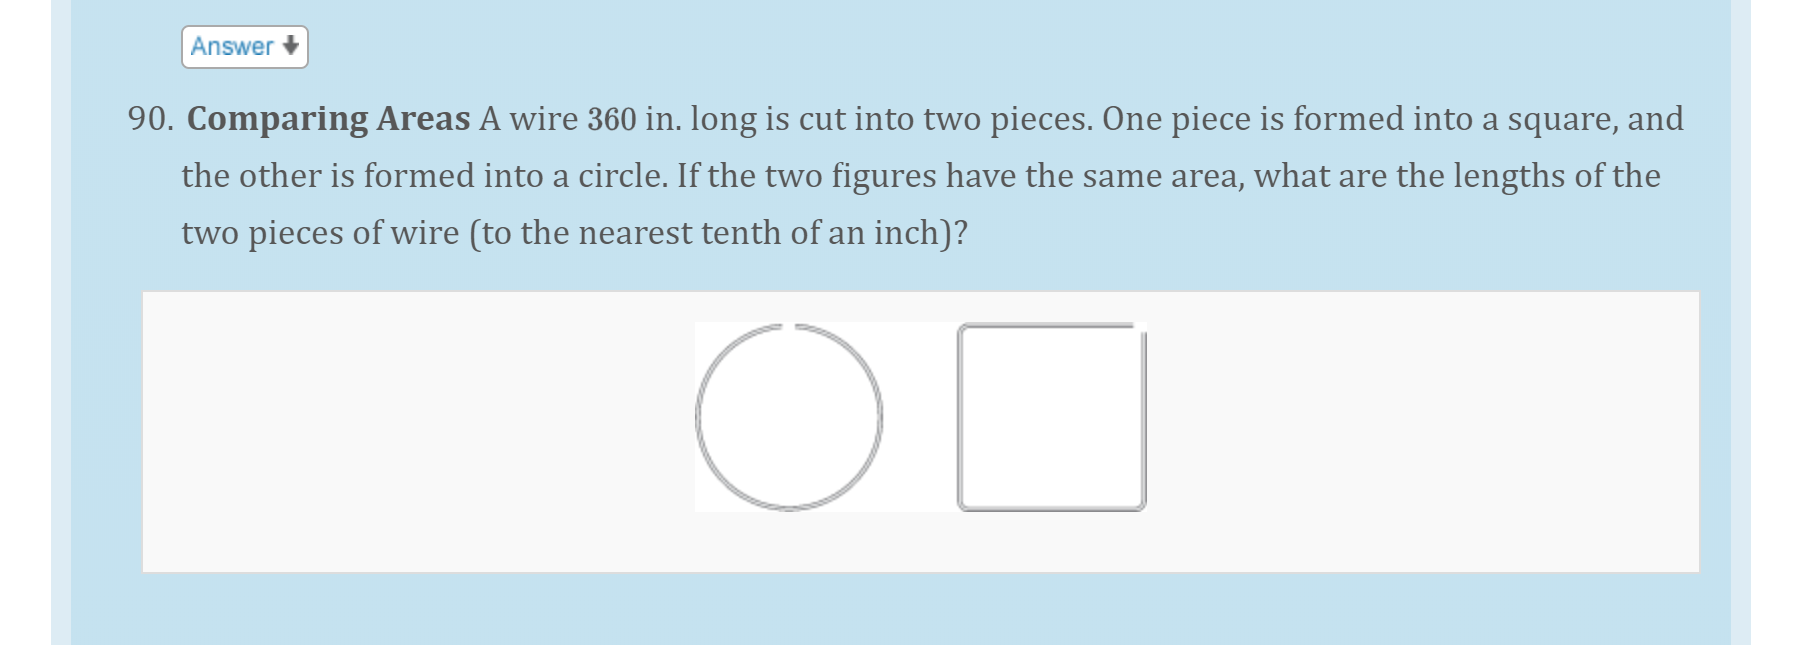 90. Comparing Areas A wire 360 in. long is cut into two pieces. One piece is formed into a square, and
the other is formed into a circle. If the two figures have the same area, what are the lengths of the
two pieces of wire (to the nearest tenth of an inch)?
